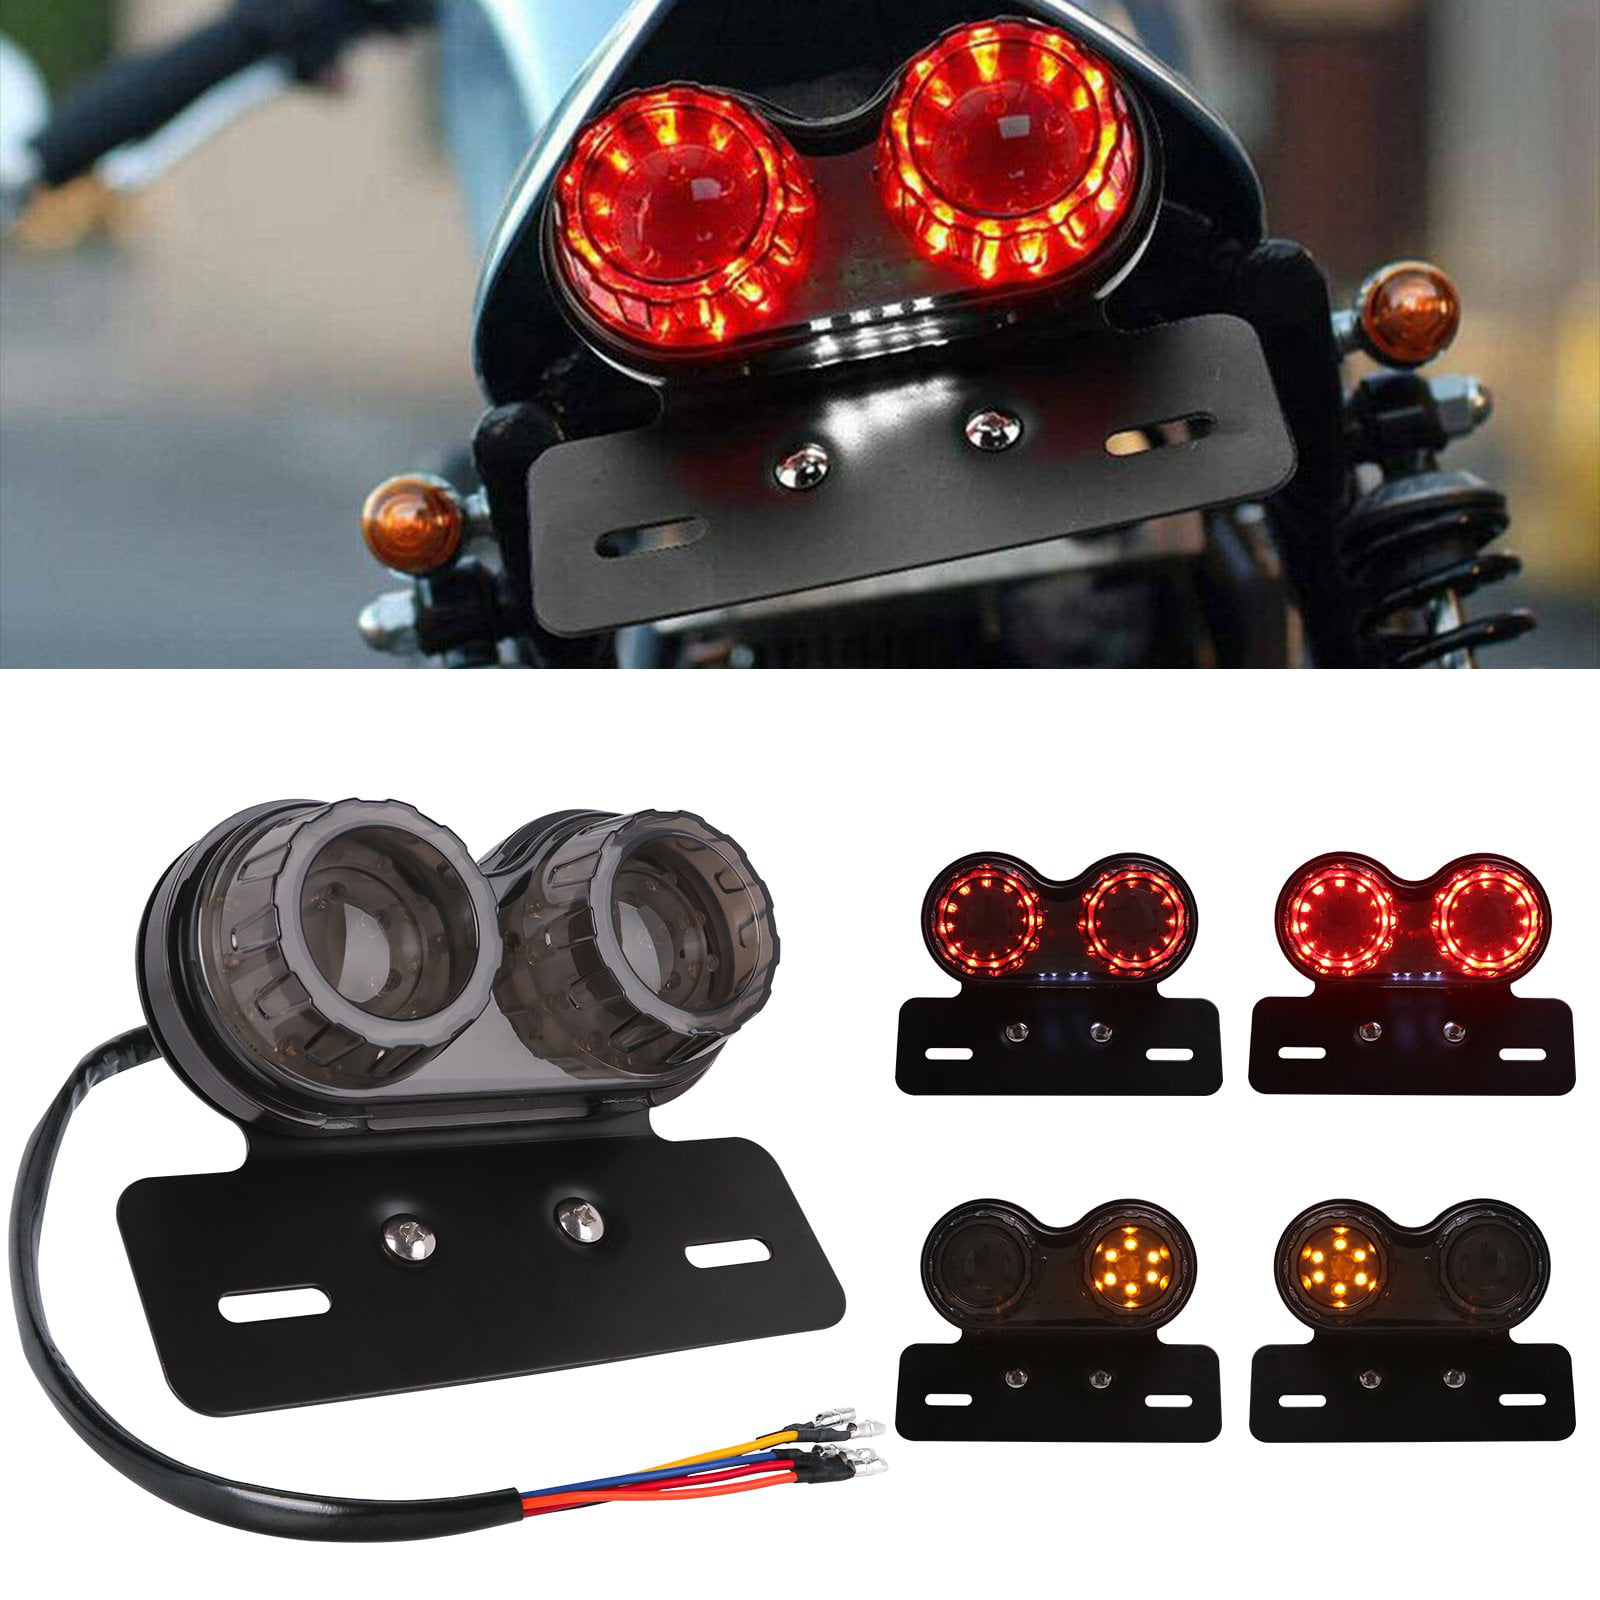 Motorcycle LED Turn Signal Light Twin Dual Tail Brake License Plate Integrated